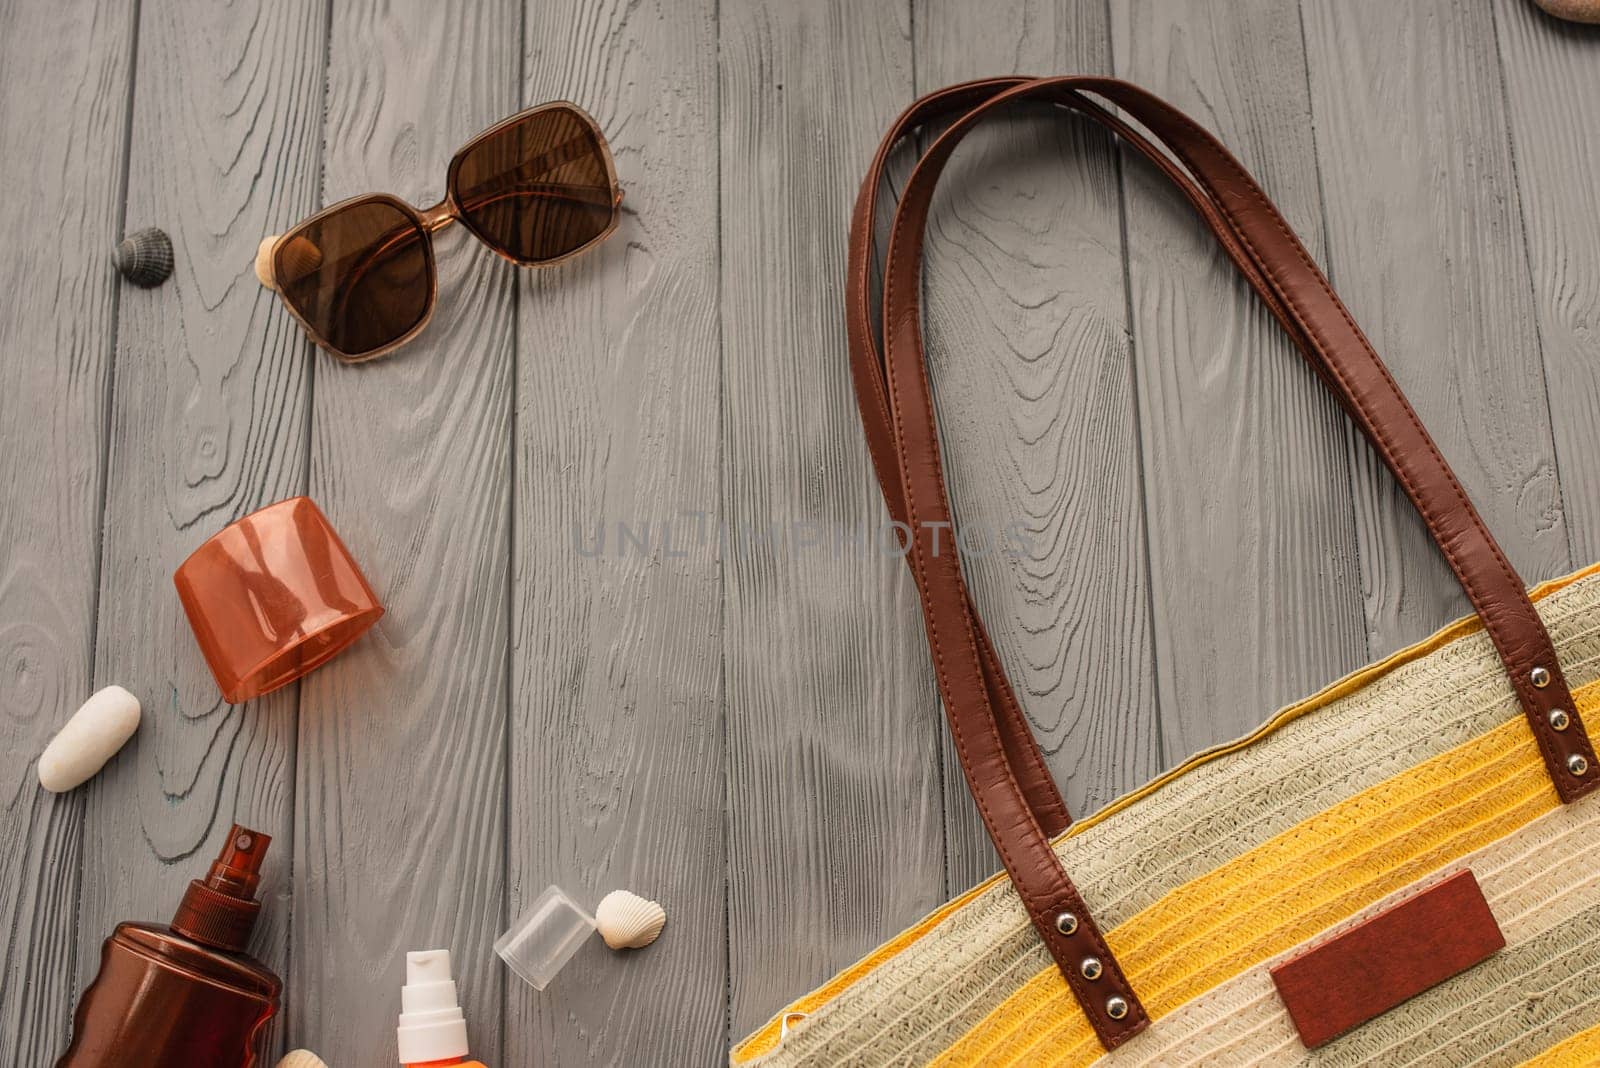 beachwear bag sun protection sunglasses sunscreen spray lotion cream care tan ultra-violet rays. Summer background template mockup free space pattern composition text. Top view above wooden background